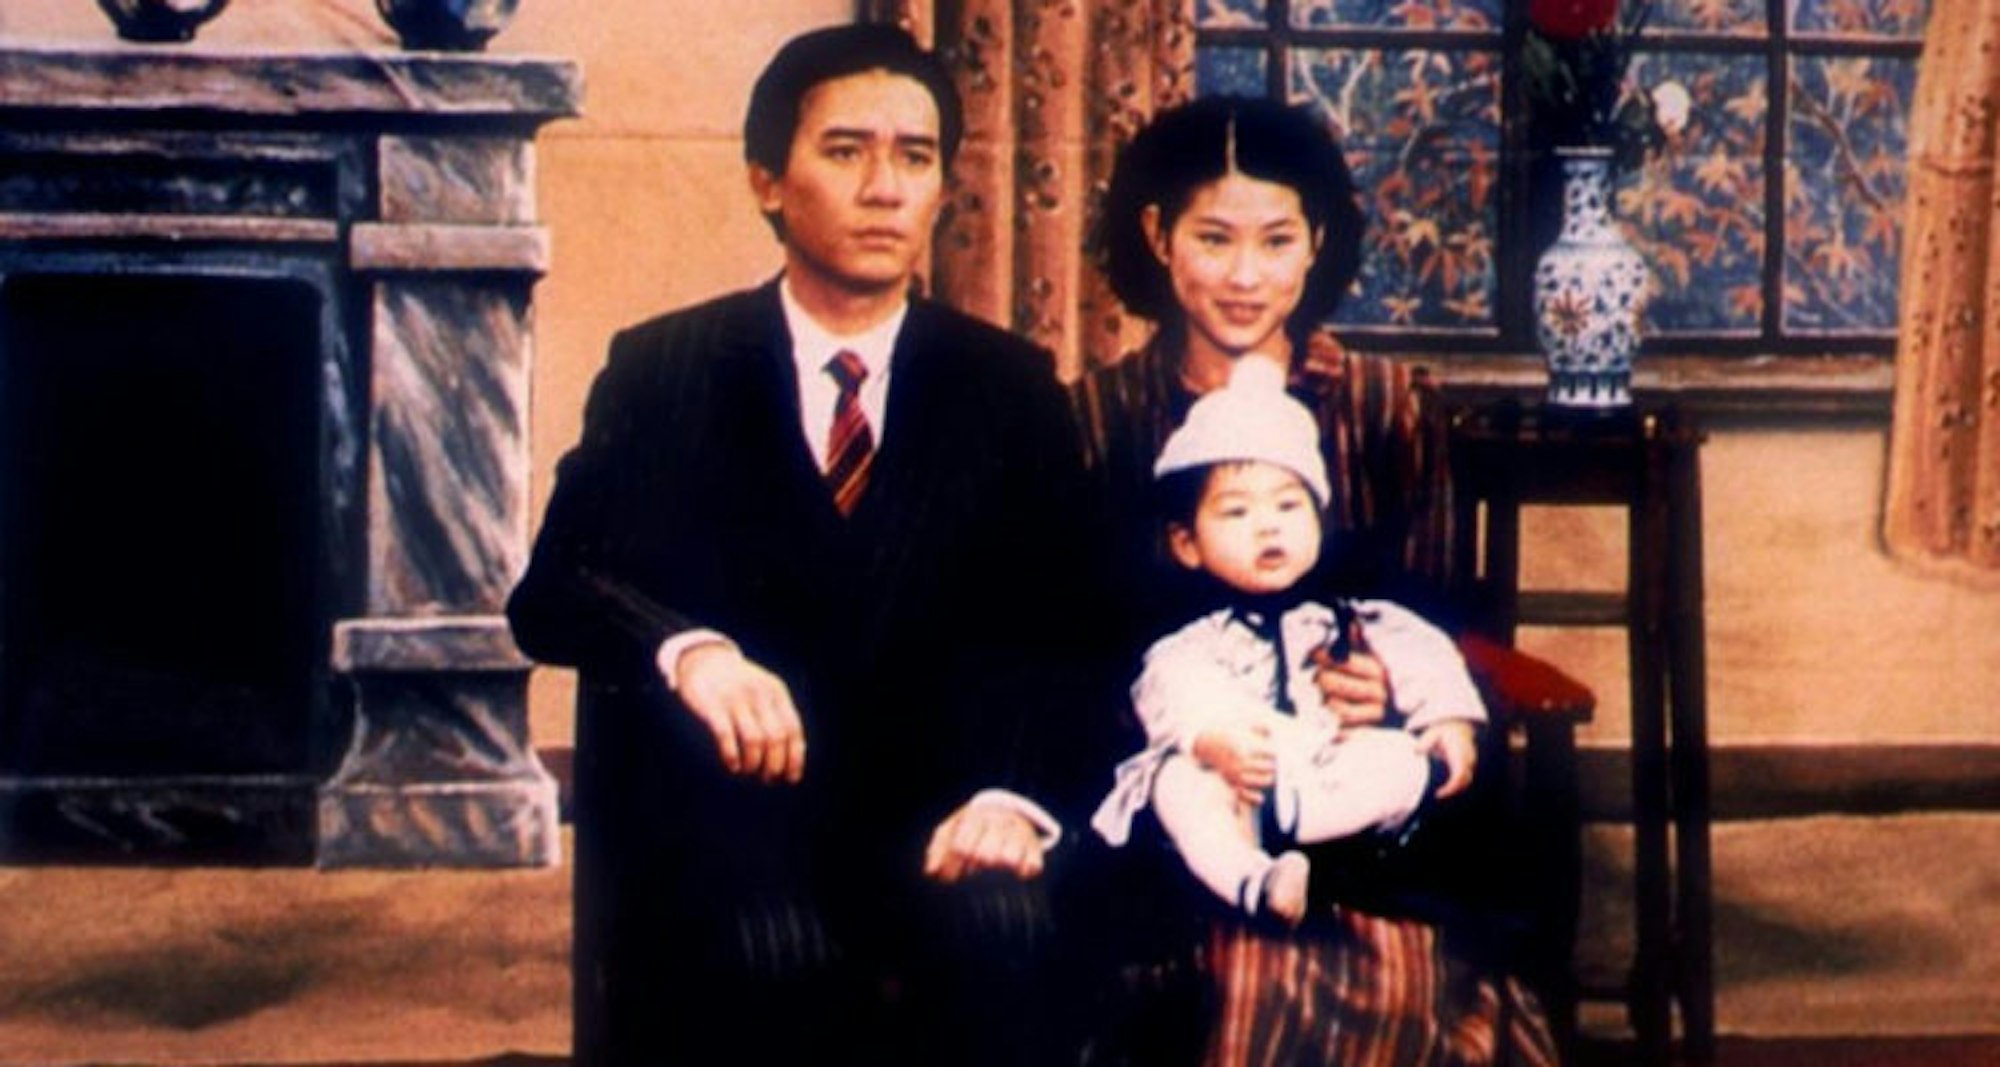 A finely dressed man and a woman with a baby on her lap are seated on a bench, posing for a family photo.